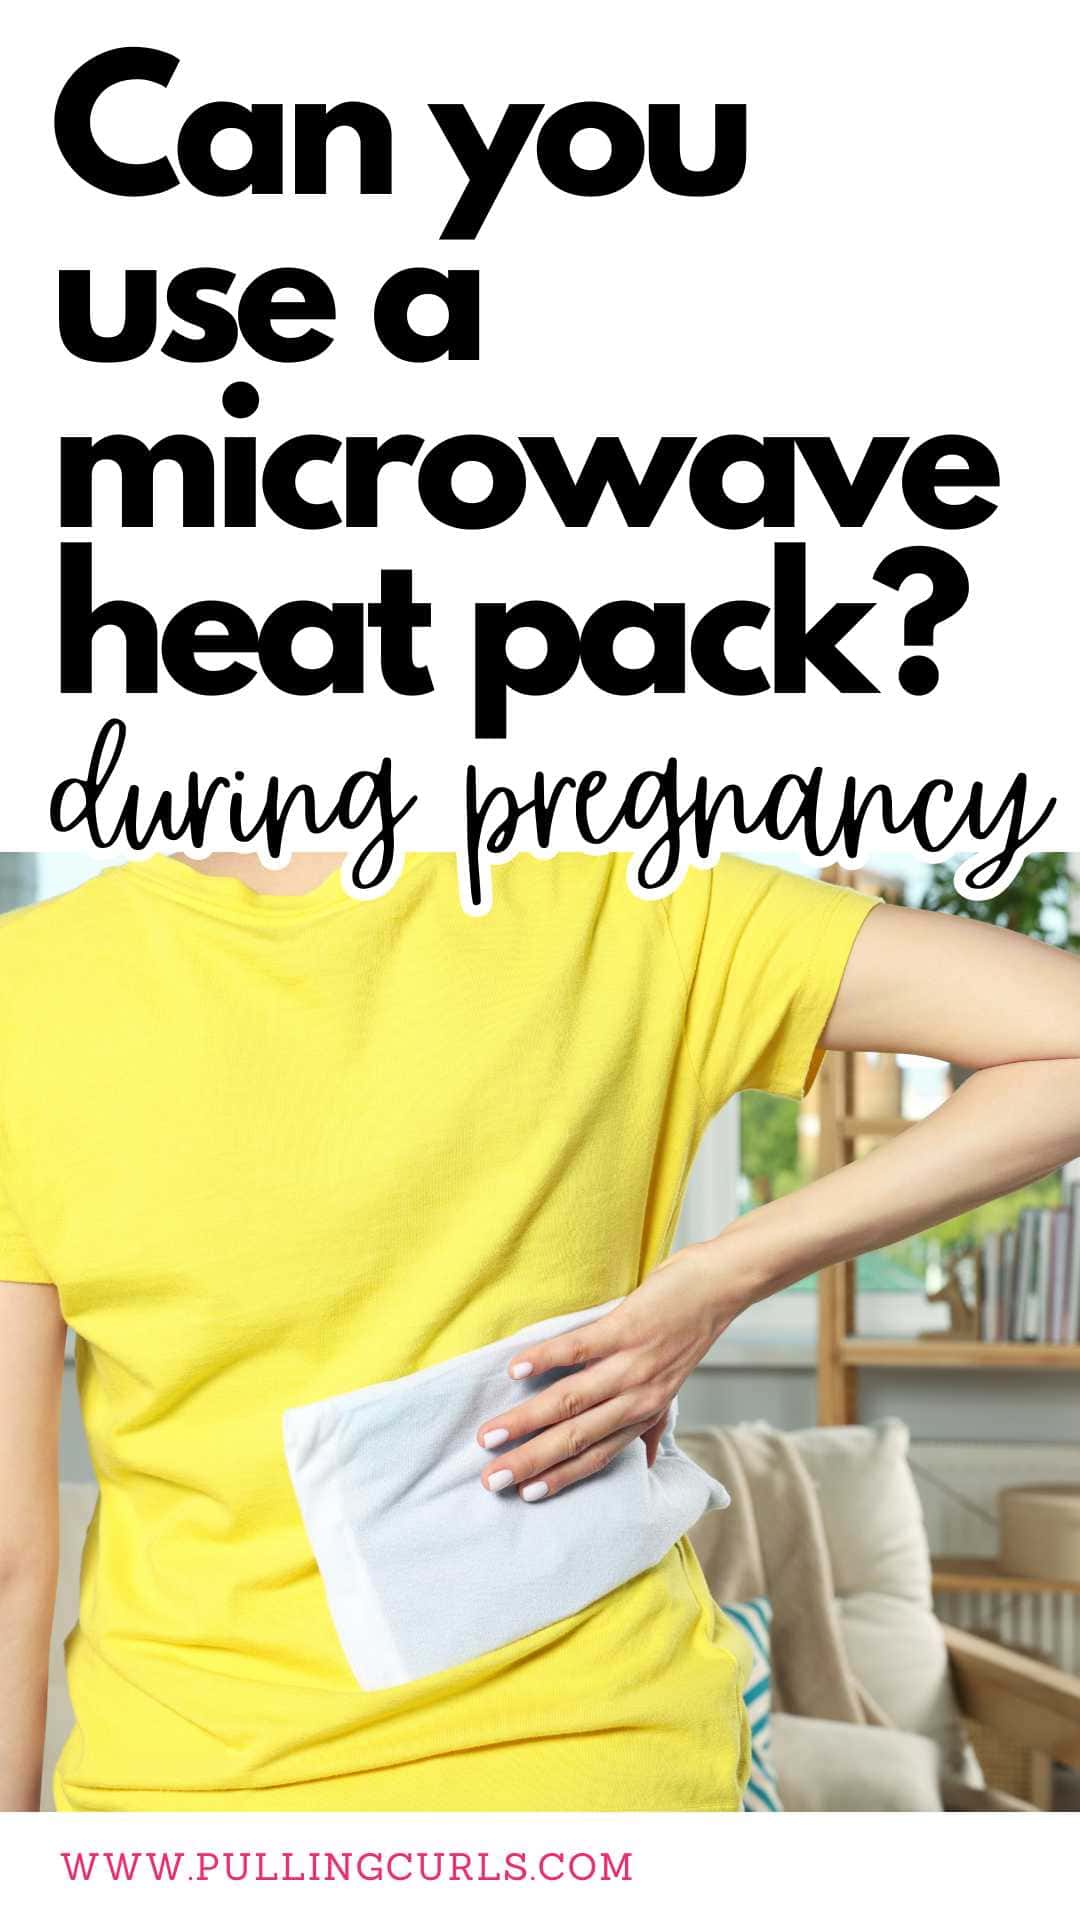 Can you use a microwave heat pack during pregnancy // woman with a microwavable heating pad on her back. via @pullingcurls